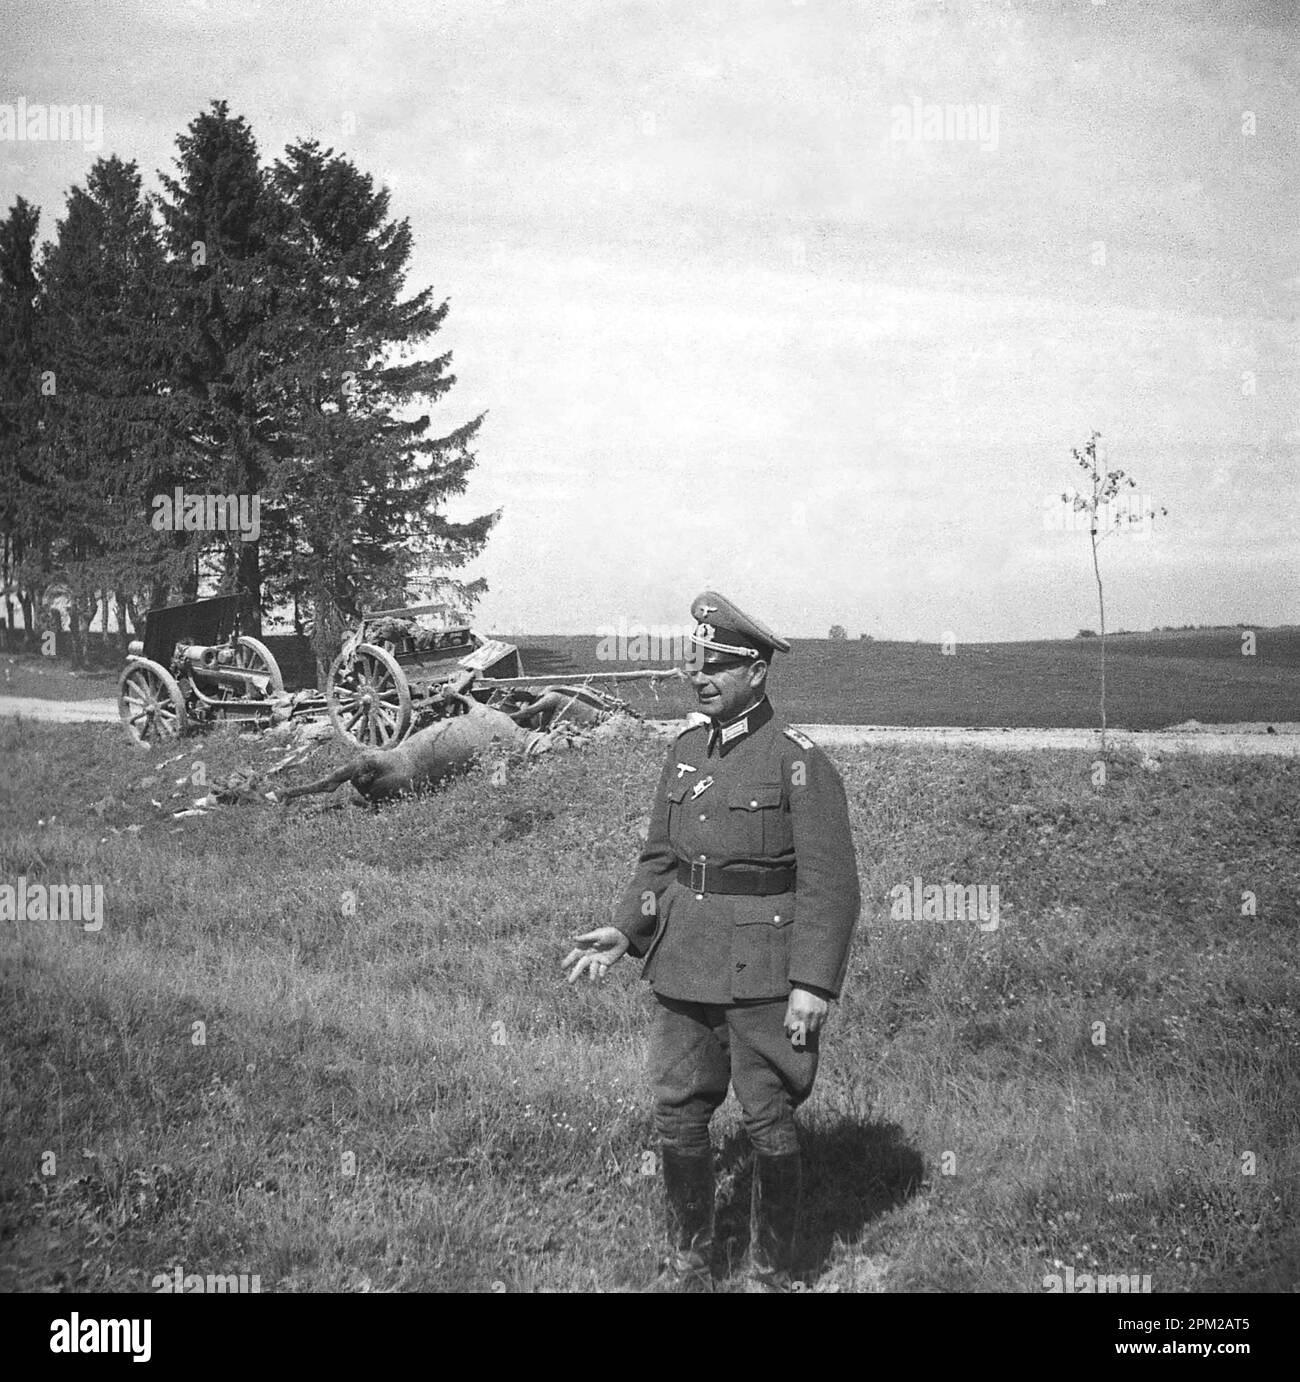 Historical World War II, 1940s, photo of a German Wehrmacht member in Latvia (Riga, Pskov and surroundings). Stock Photo